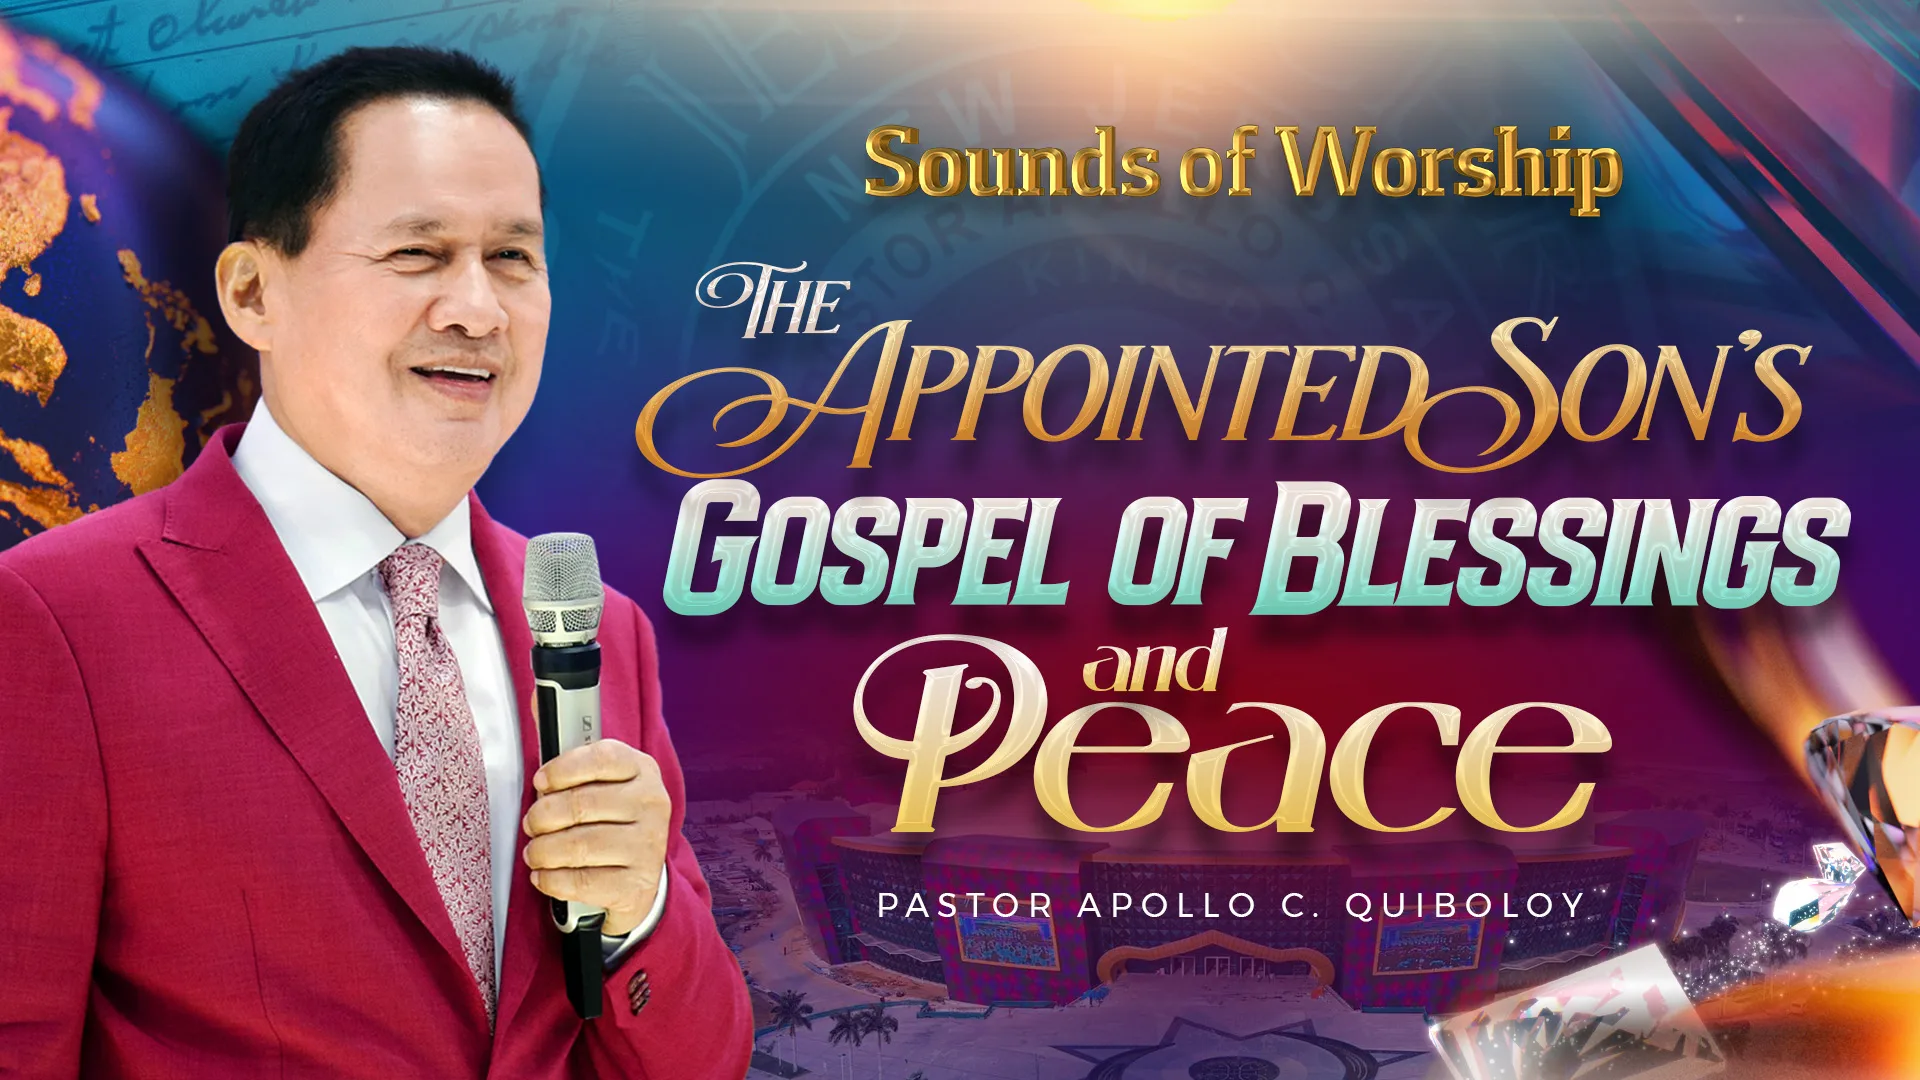 THE APPOINTED SON’S GOSPEL OF BLESSINGS AND PEACE